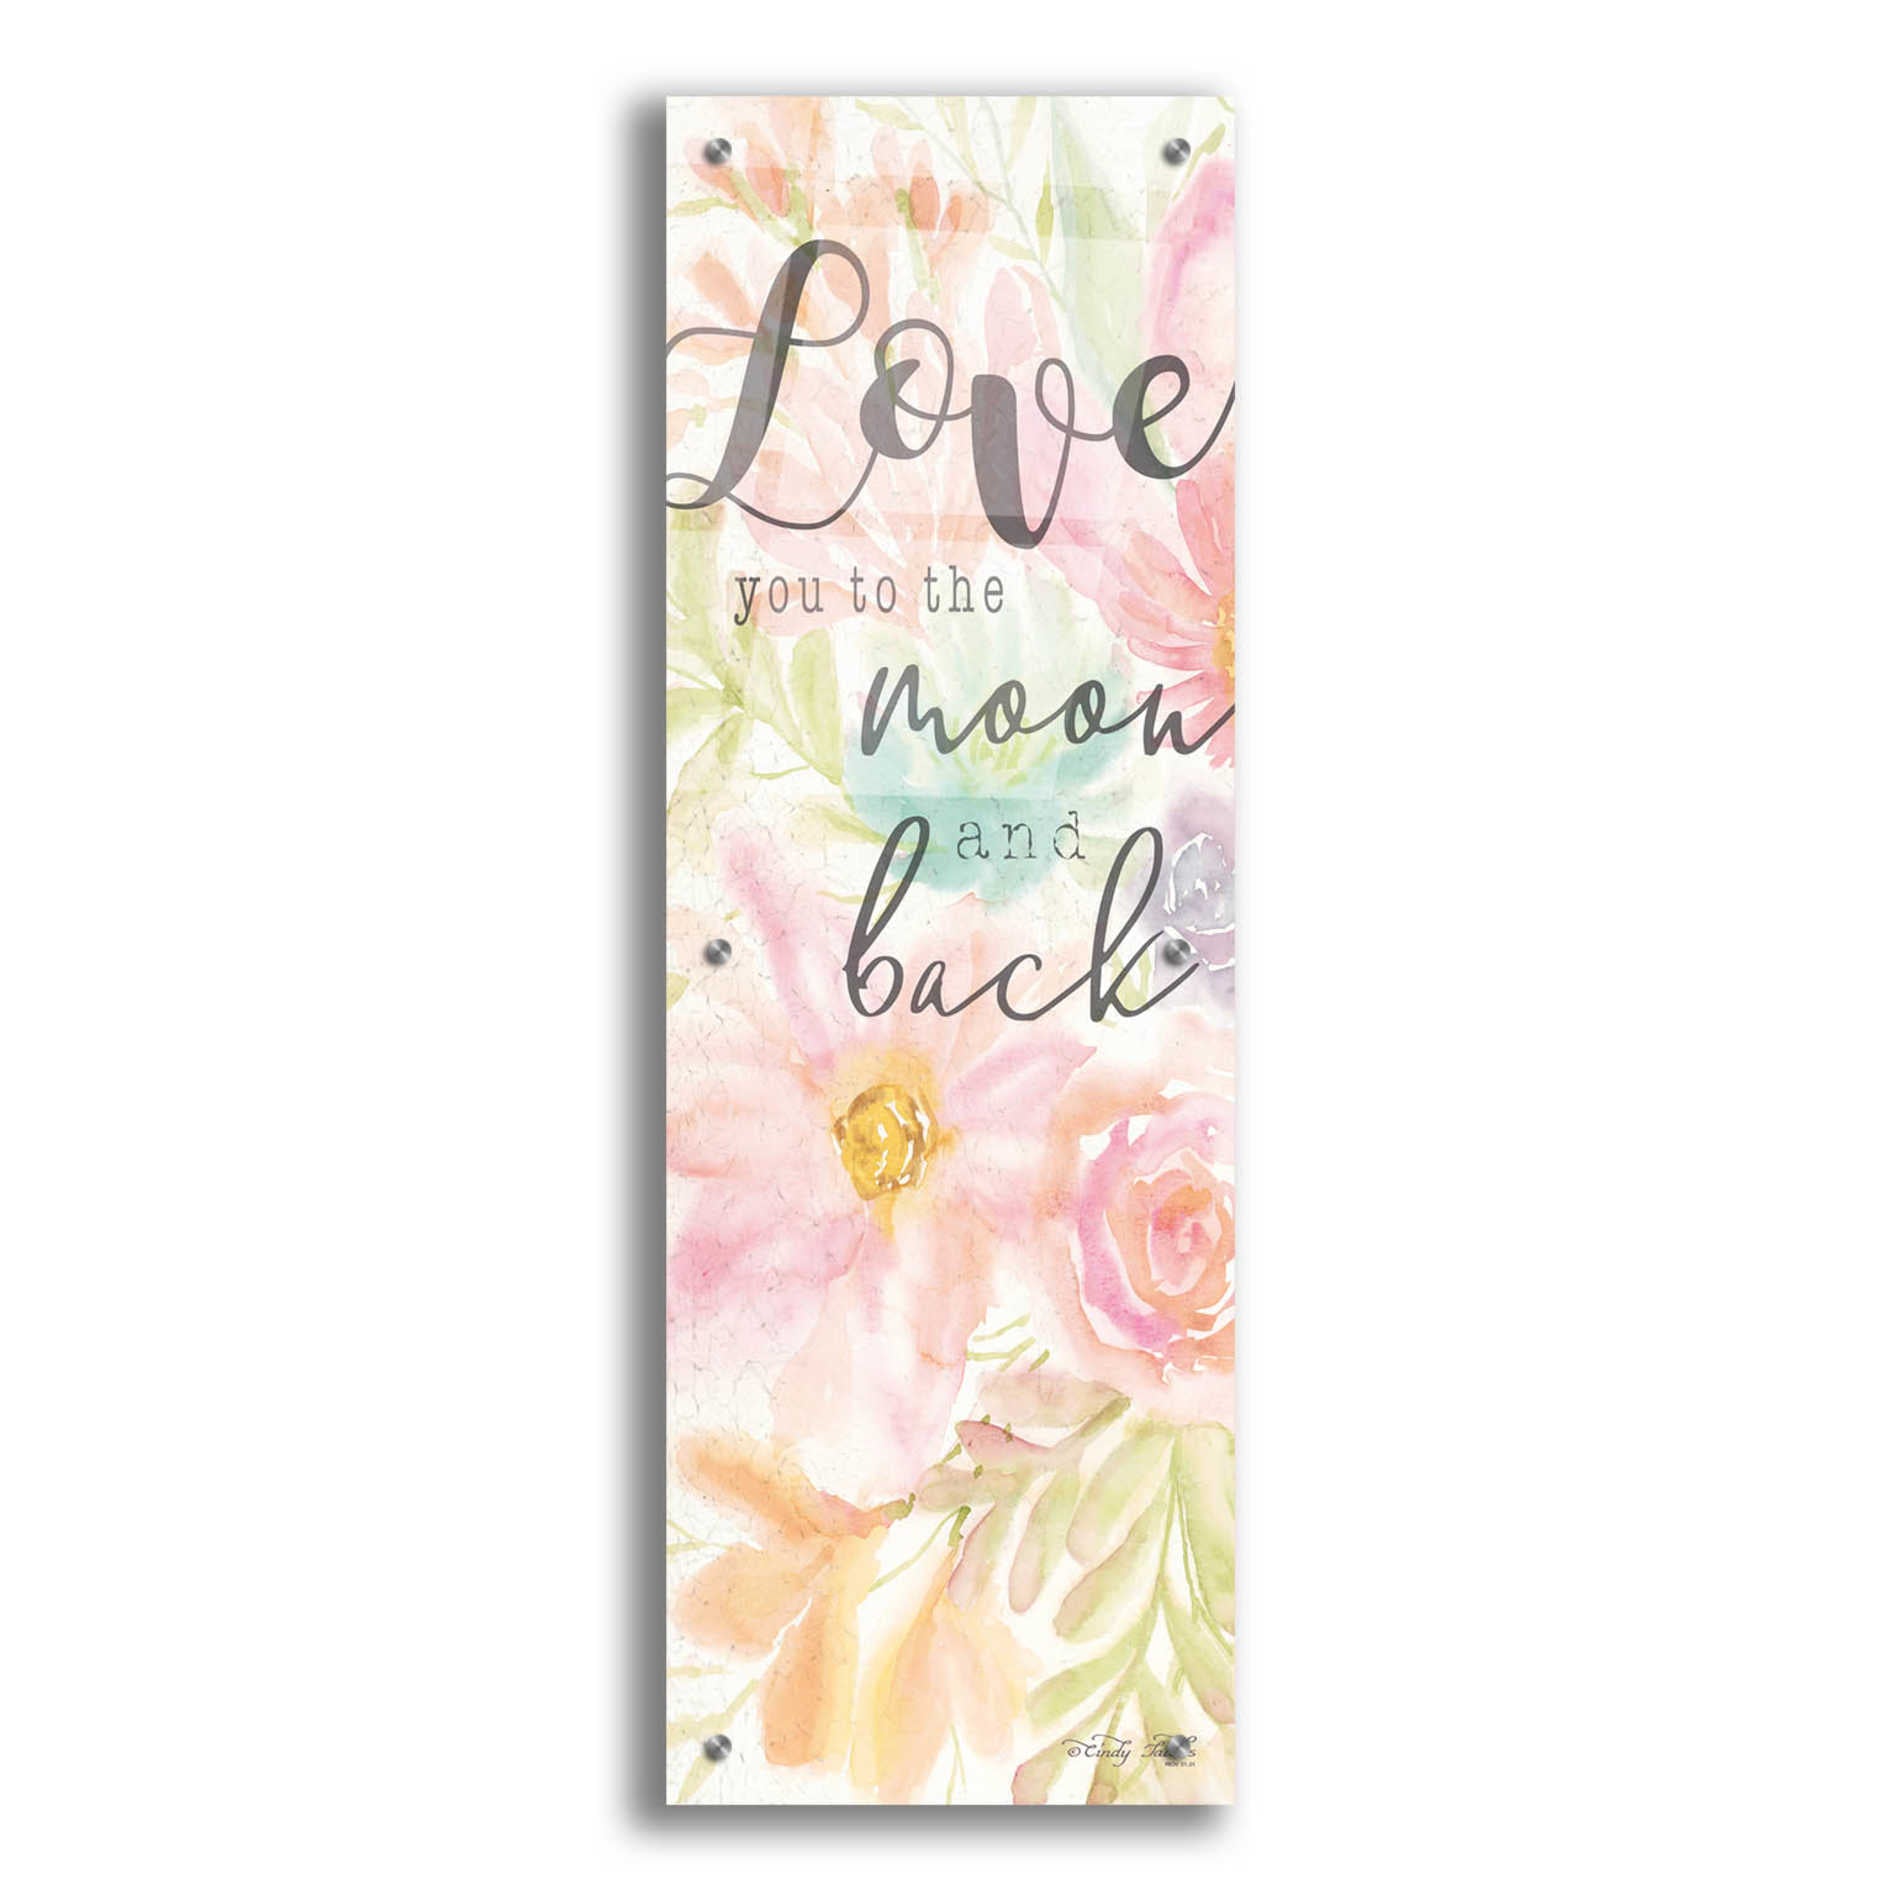 Epic Art 'I Love You to the Moon and Back' by Cindy Jacobs, Acrylic Glass Wall Art,12x36